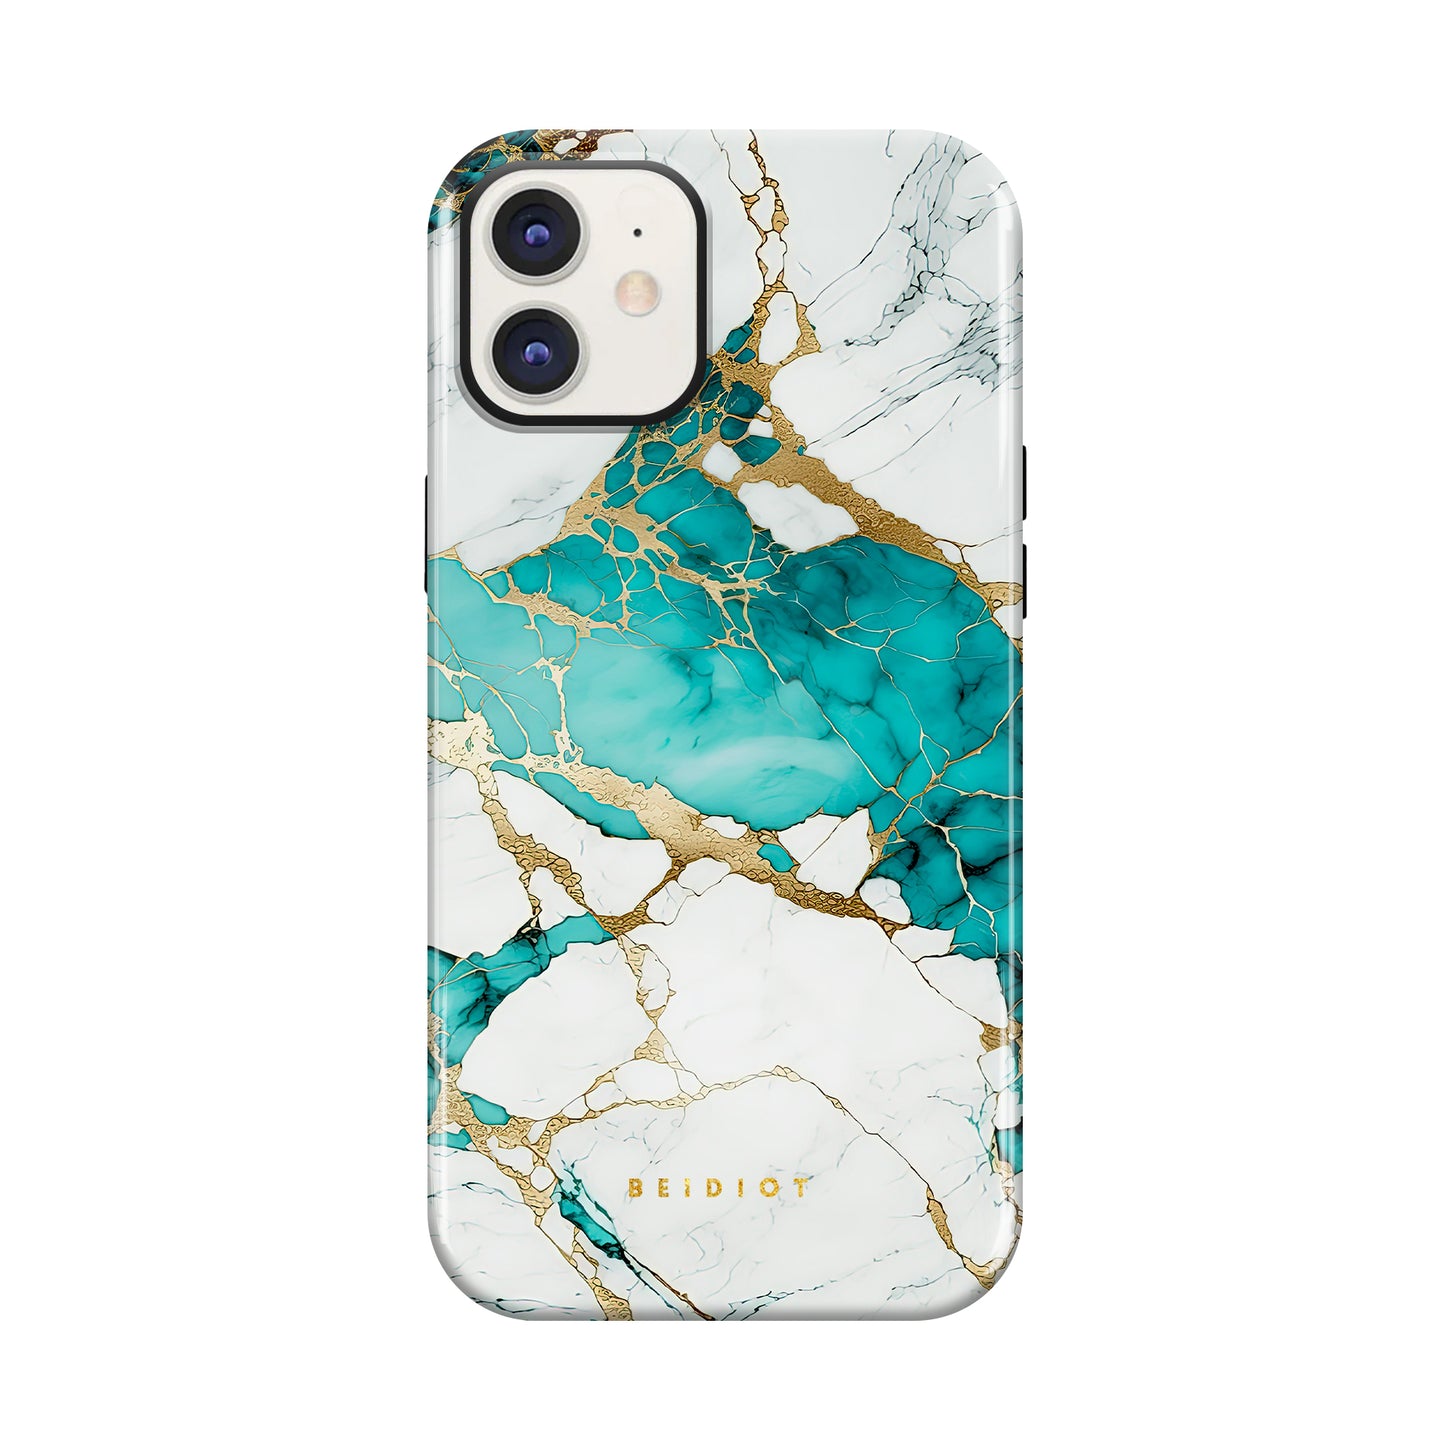 Imperial Tide iPhone Case